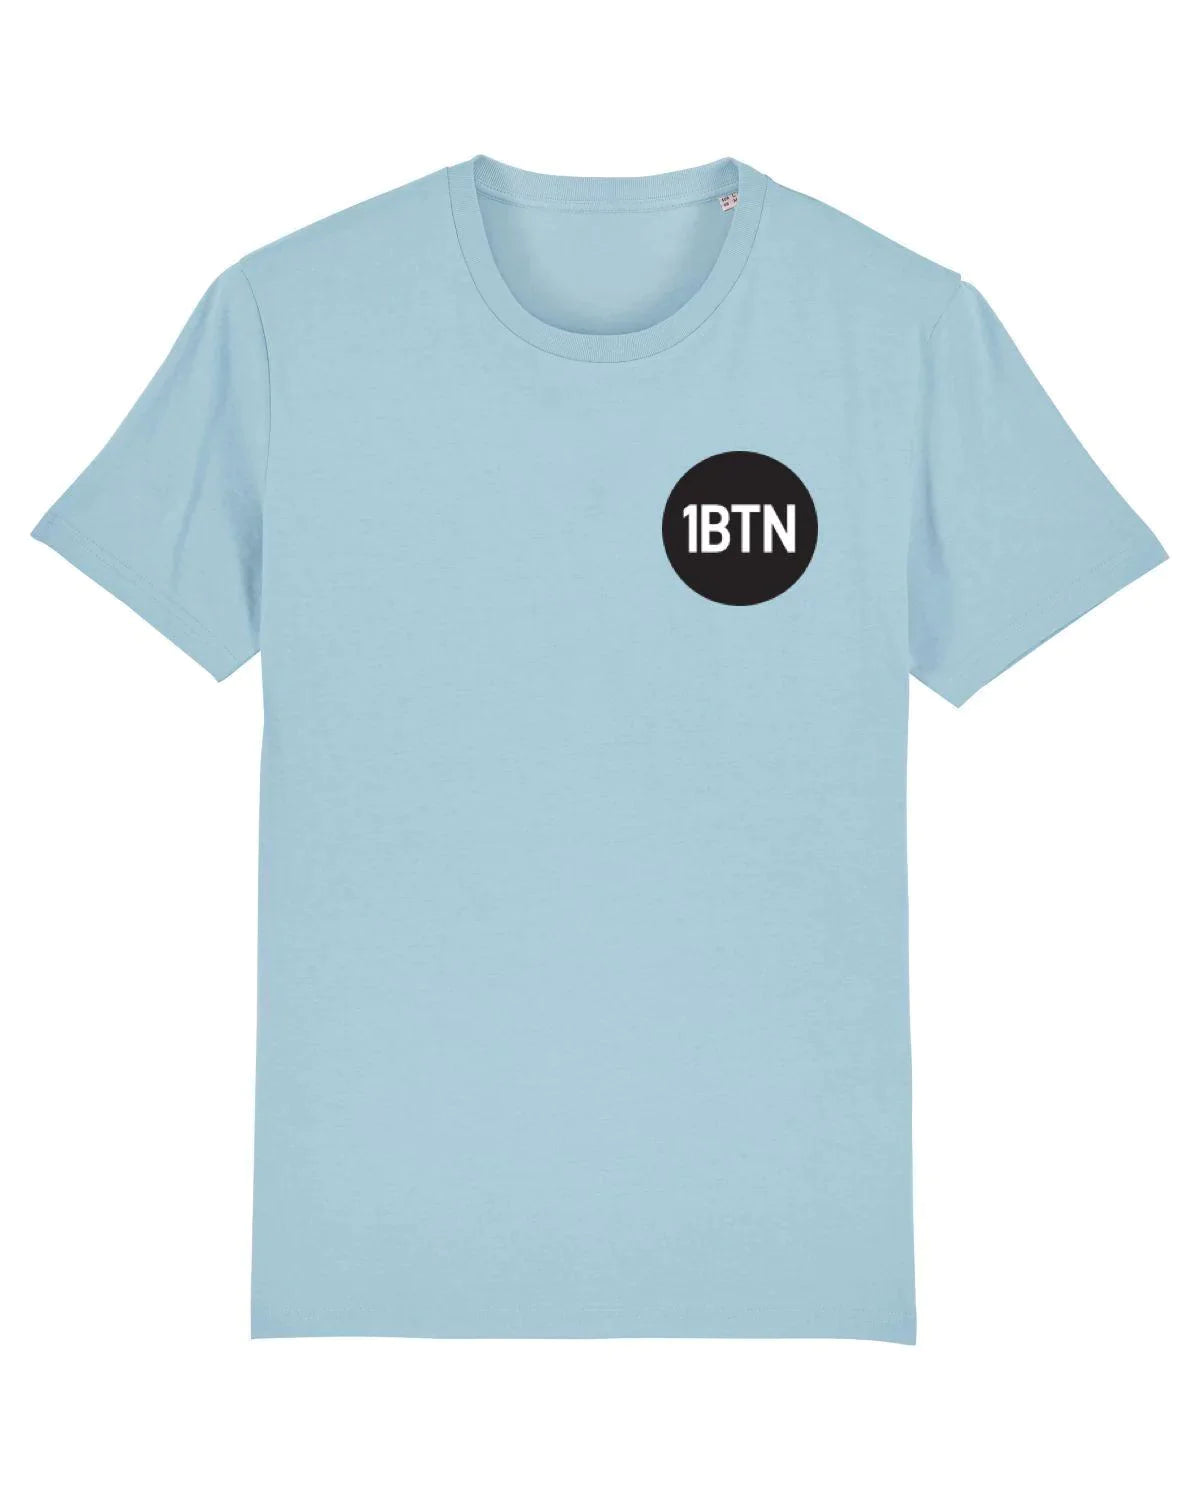 1BTN 2 SIDED2: T-Shirt Official Merchandise of 1BTN.FM - SOUND IS COLOUR